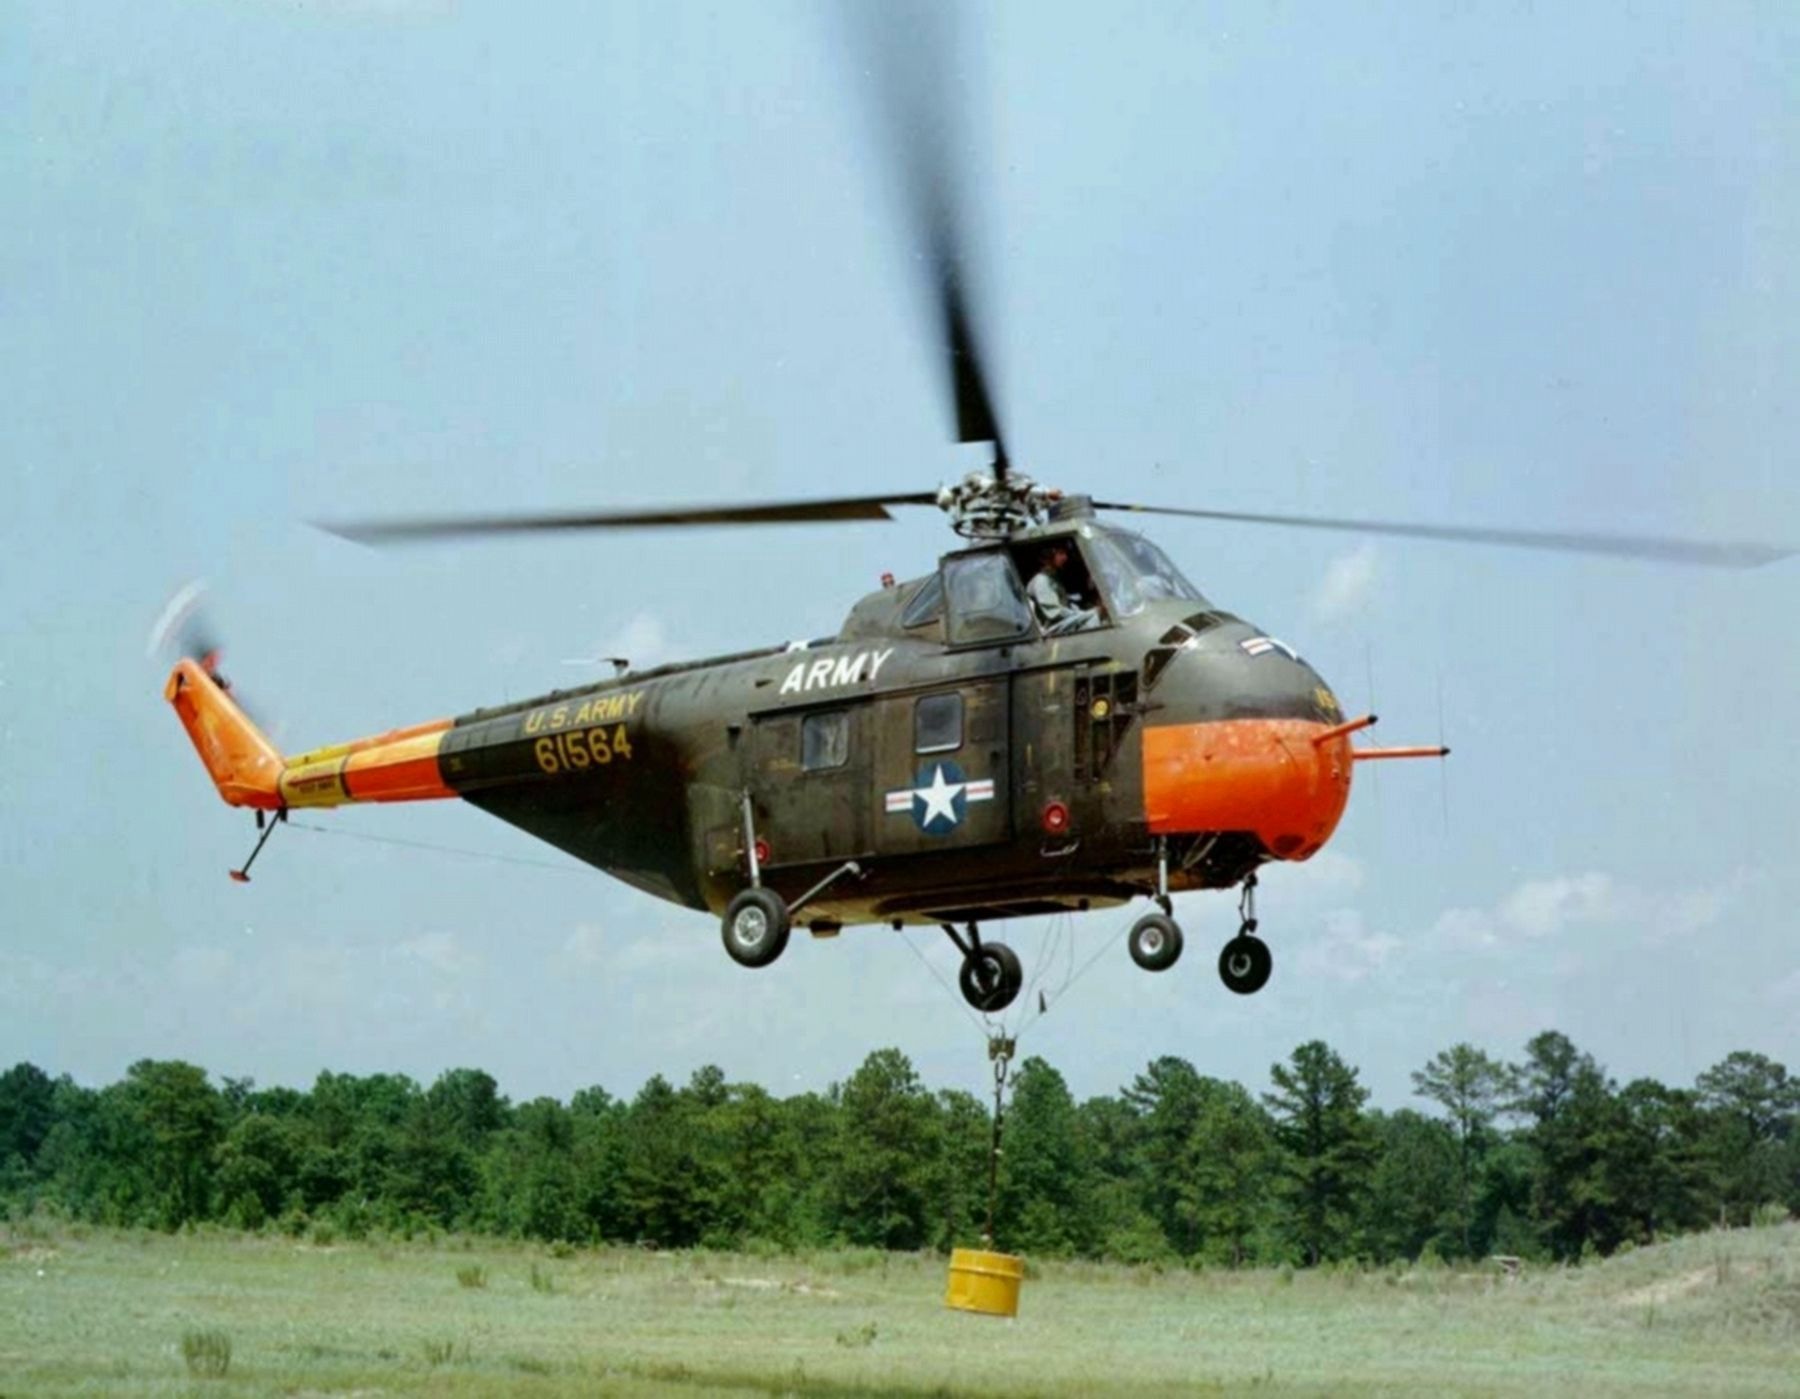 A U.S. Army Sikorsky UH-19D Chickasaw helicopter (s/n 56-1564) in flight. image. Click for full size.